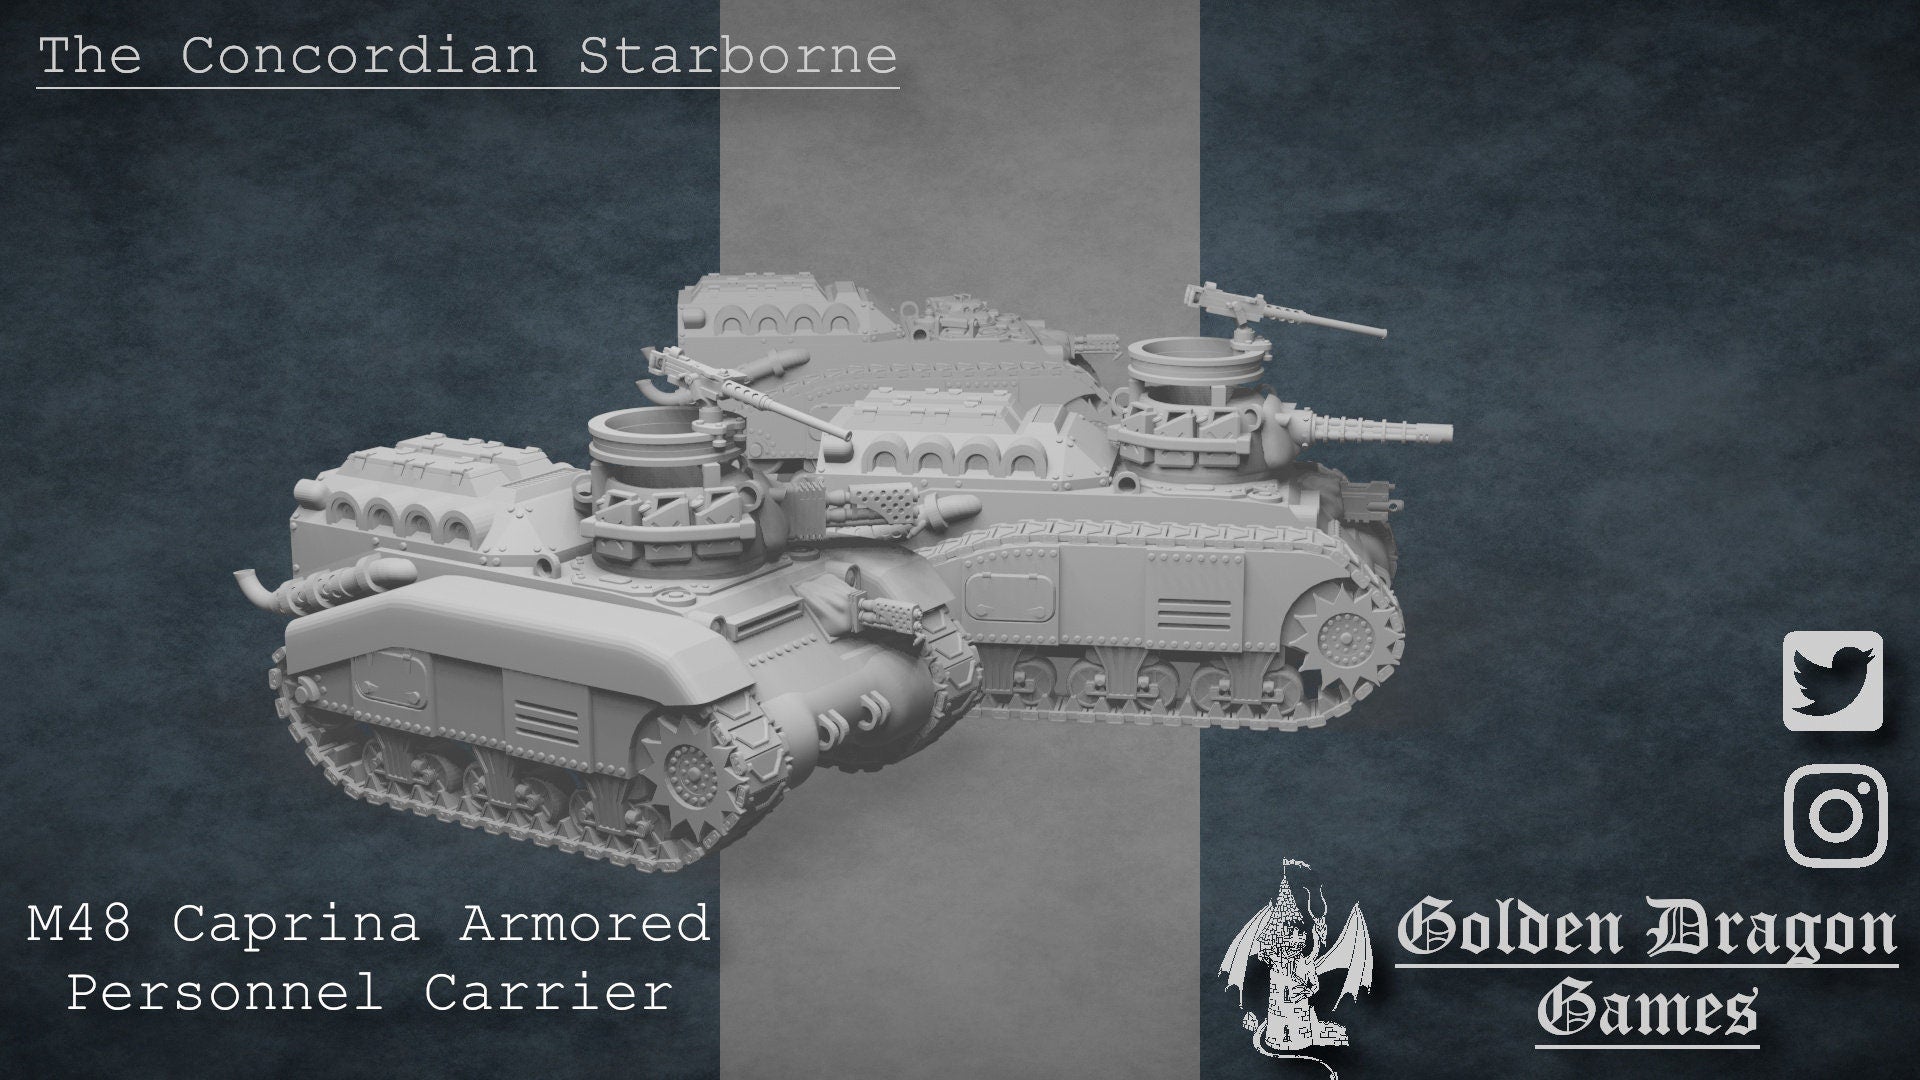 M48 Caprina Armored Personnel Carrier - Trisagion Models